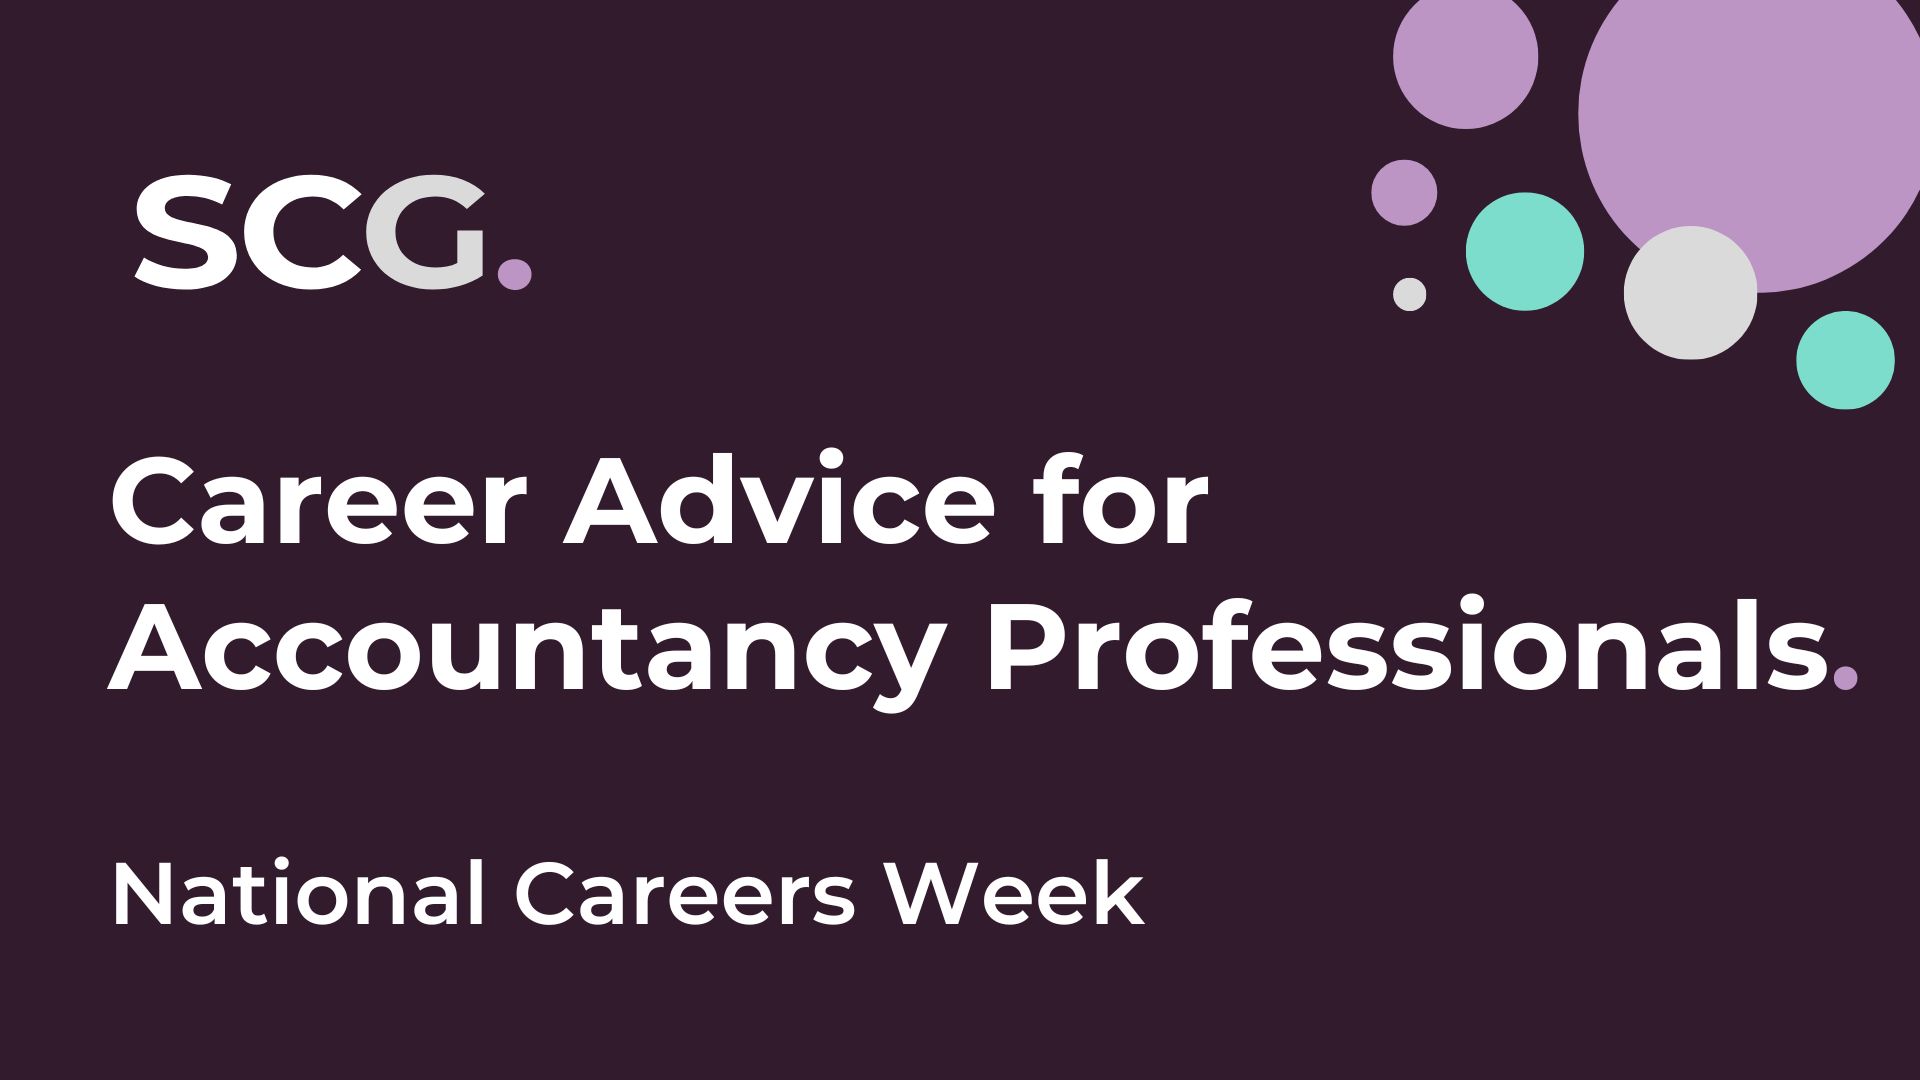 Career Advice for Accountancy Professionals